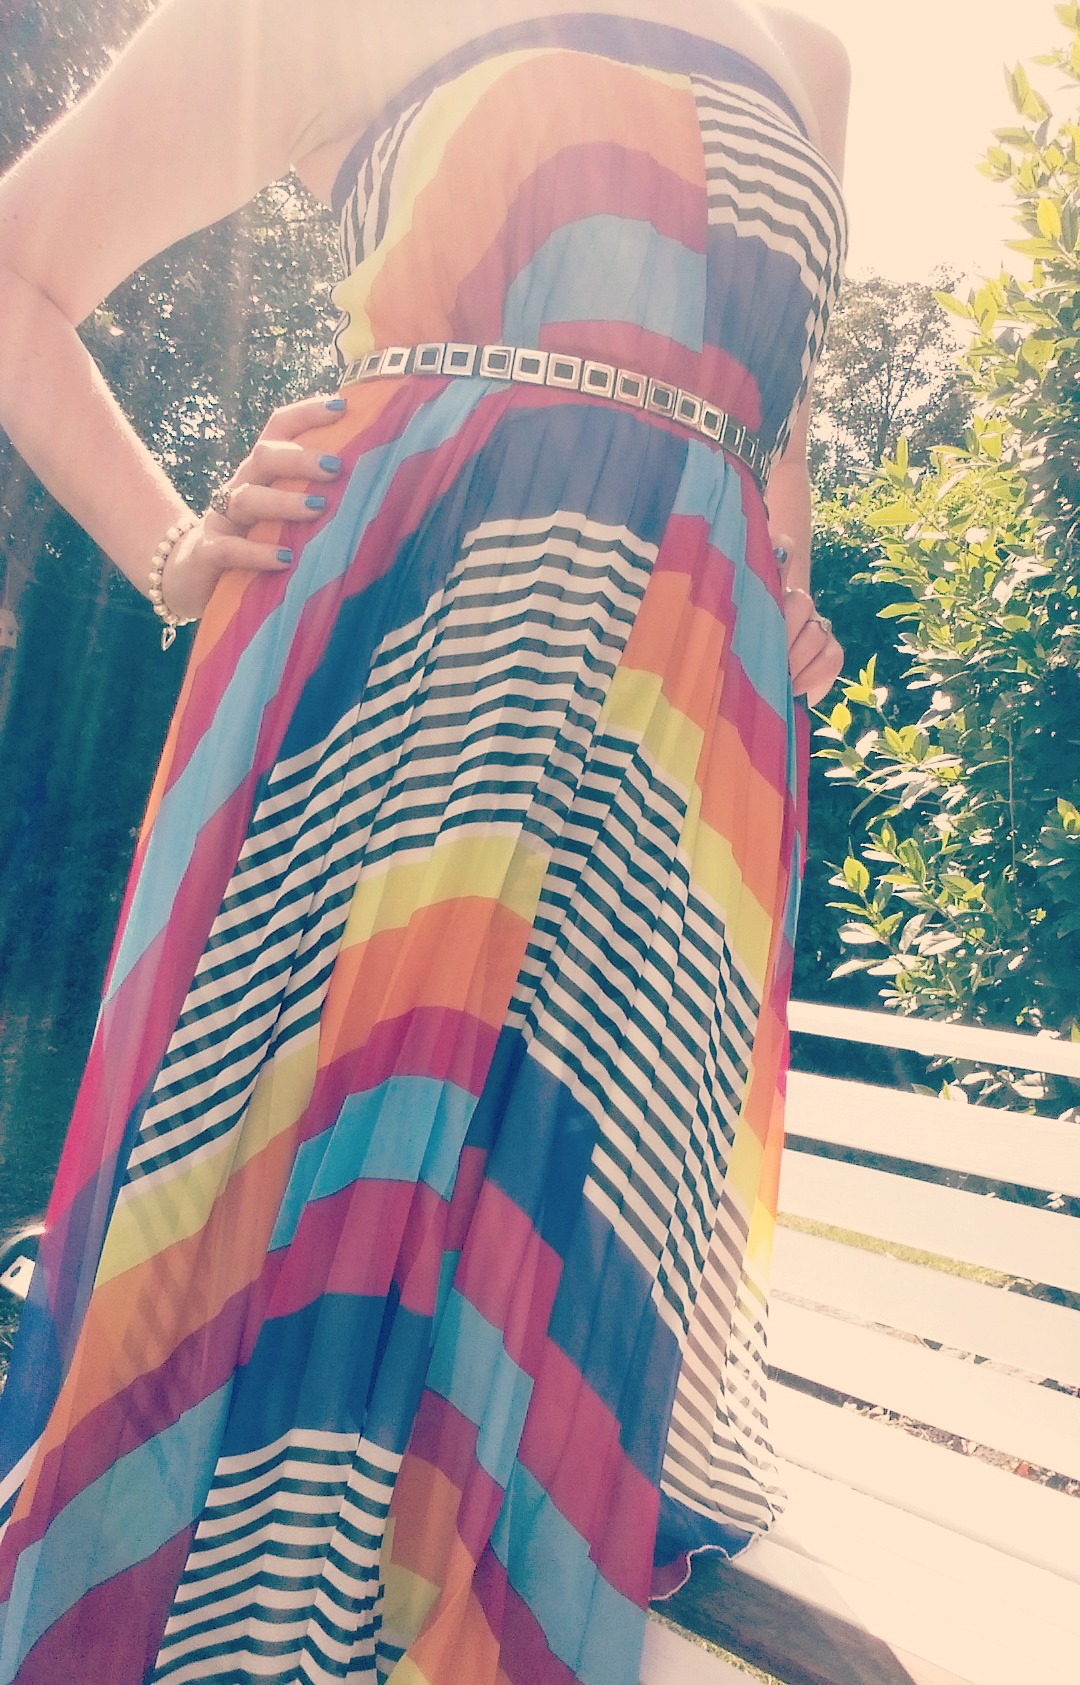 Searching for pots of gold in a vibrant rainbow dress